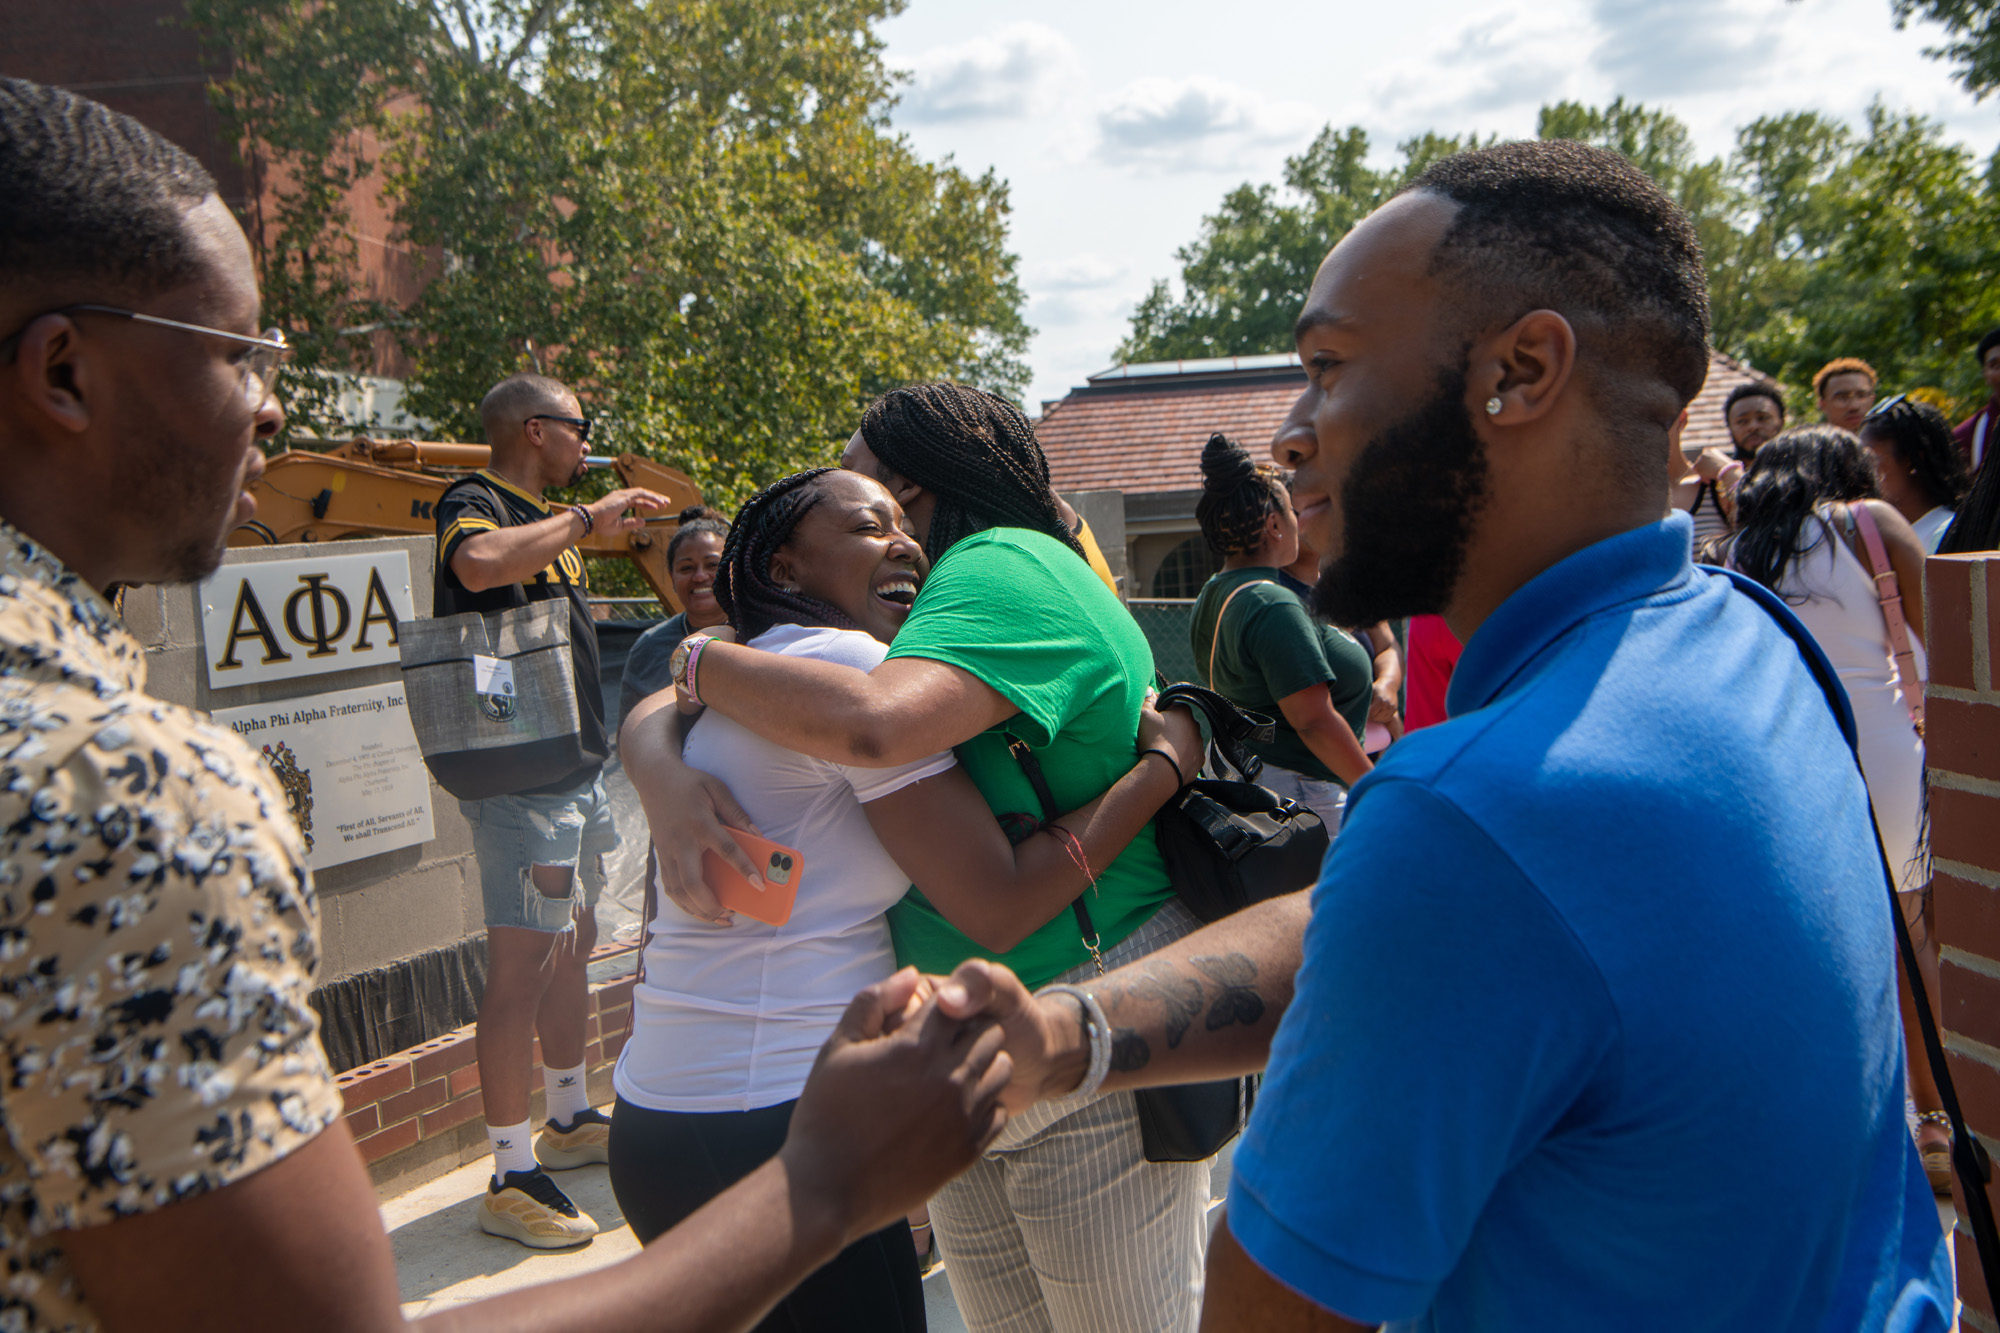 OHIO graduates on campus for Black Alumni Reunion were among the first to get a glimpse of the progress made on the plaza – and an opportunity to reconnect with their National Pan-Hellenic Council brothers and sisters.